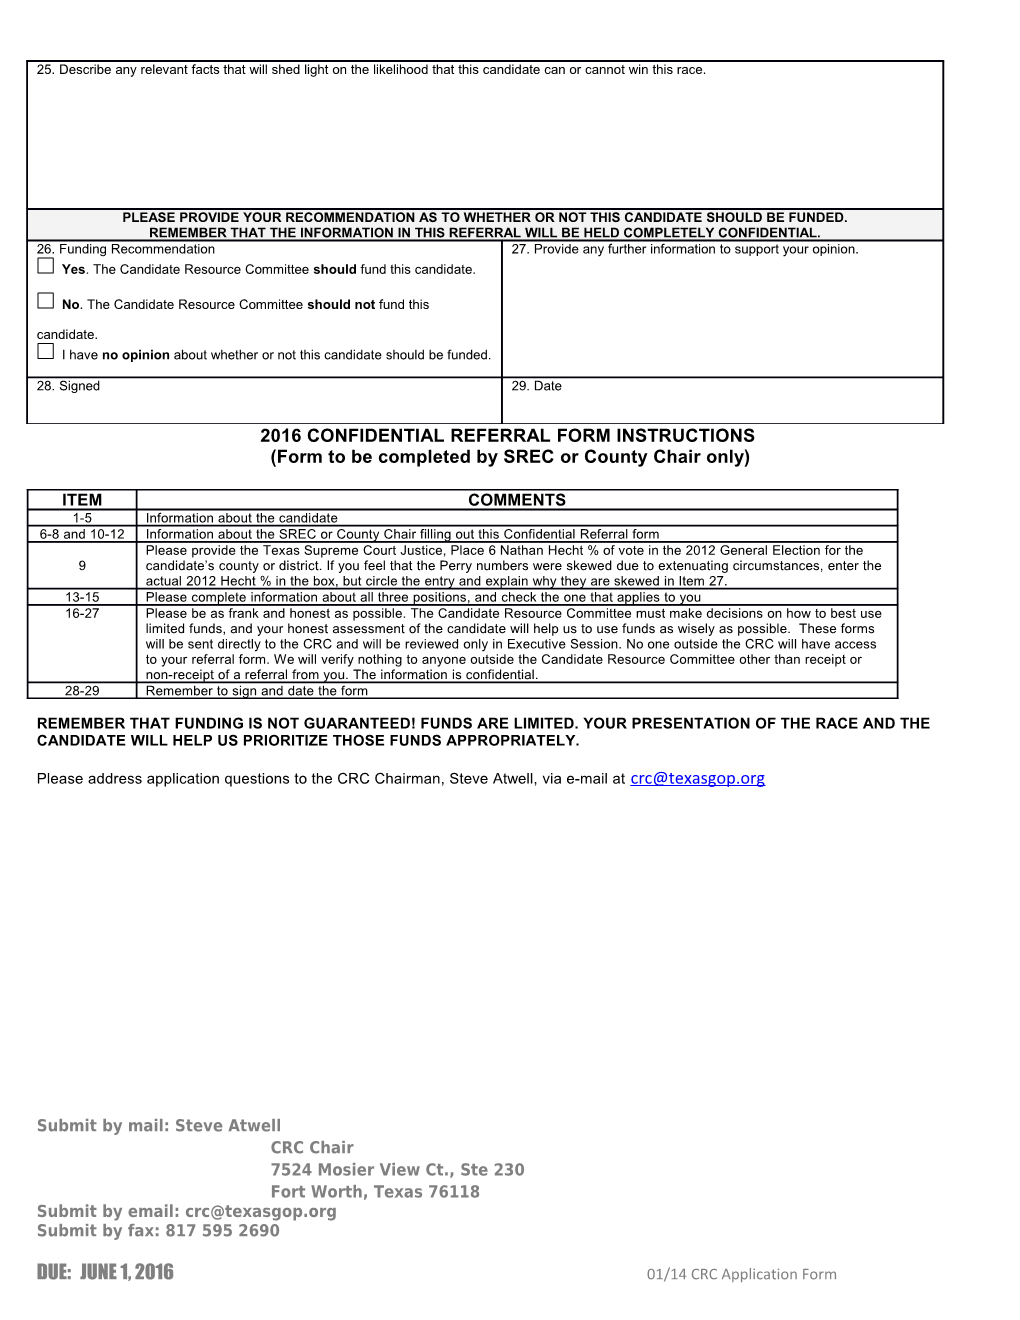 Form to Be Completed by SREC Or County Chair Only